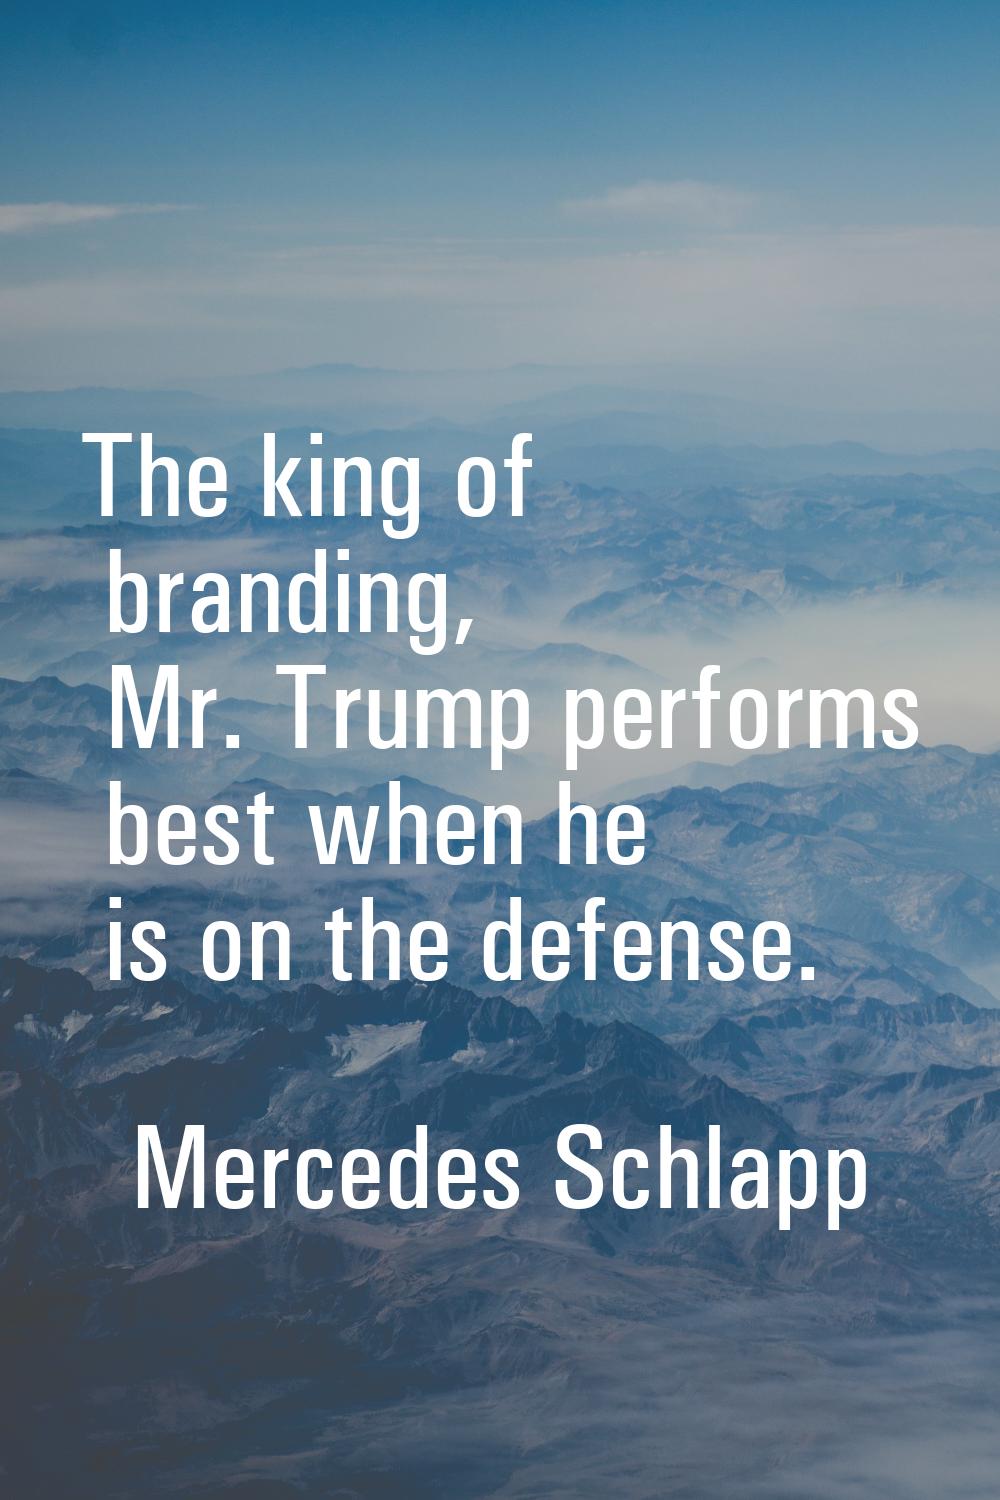 The king of branding, Mr. Trump performs best when he is on the defense.